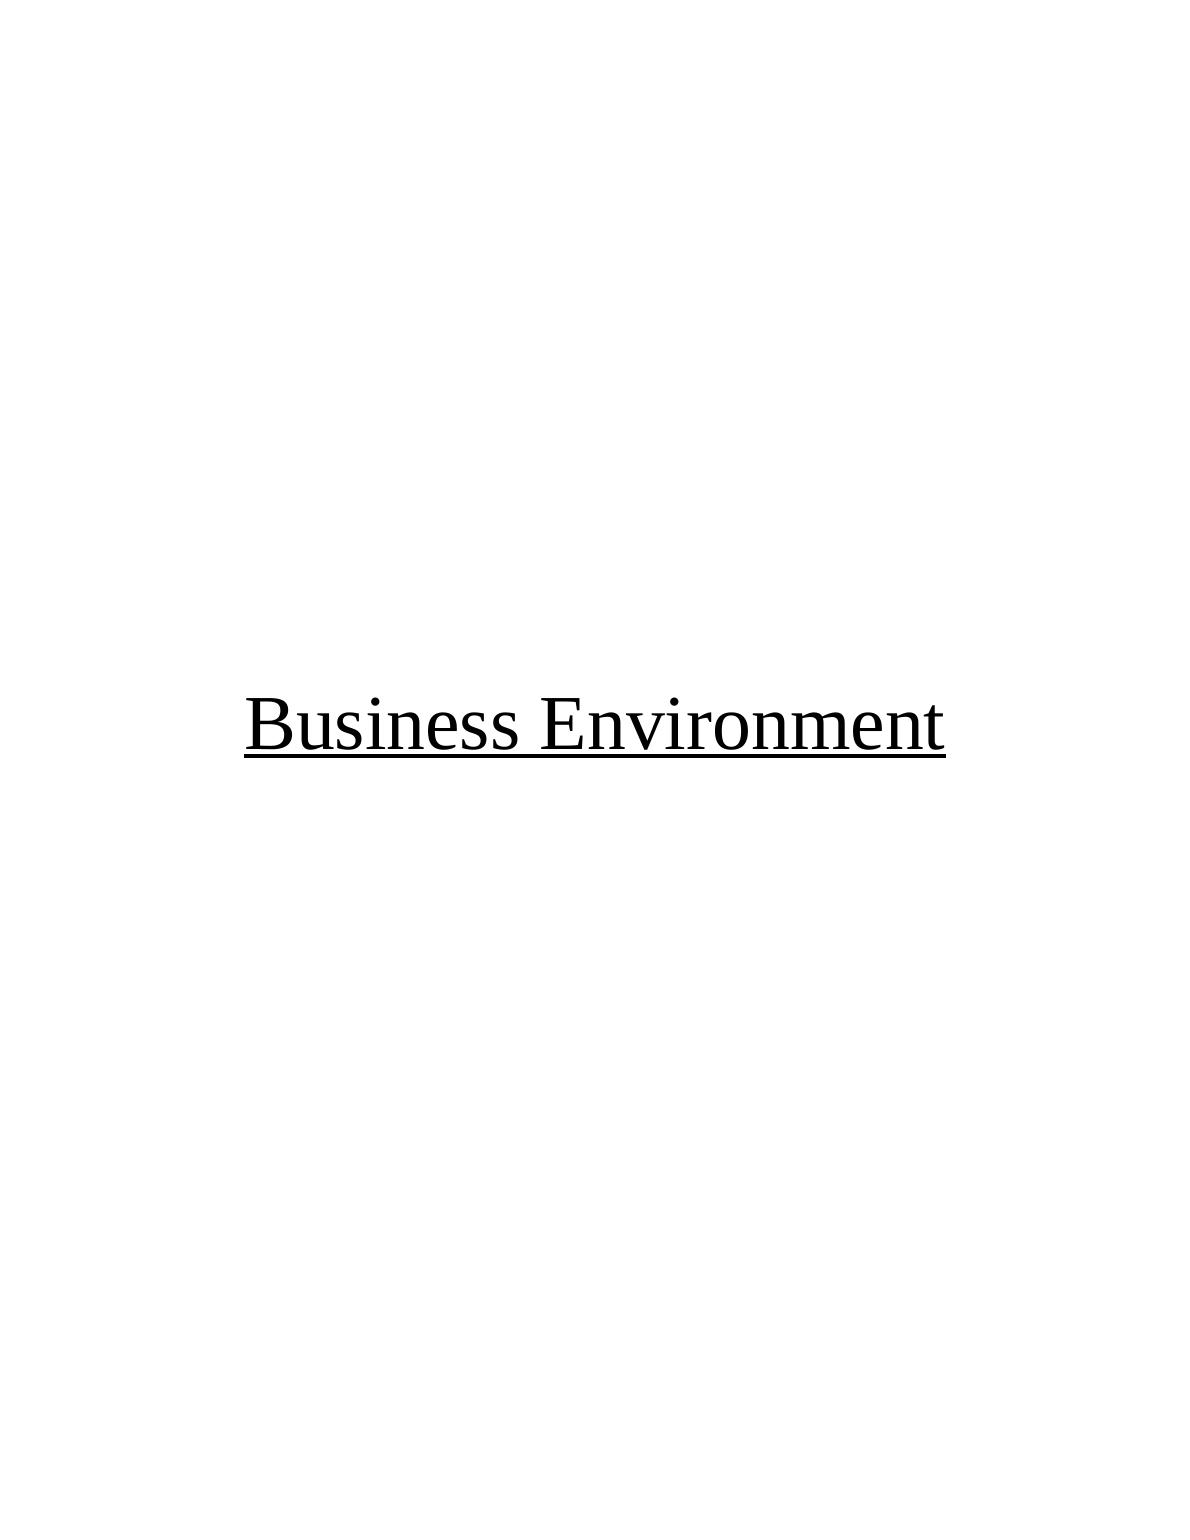 Business Environment Contents INTRODUCTION_1